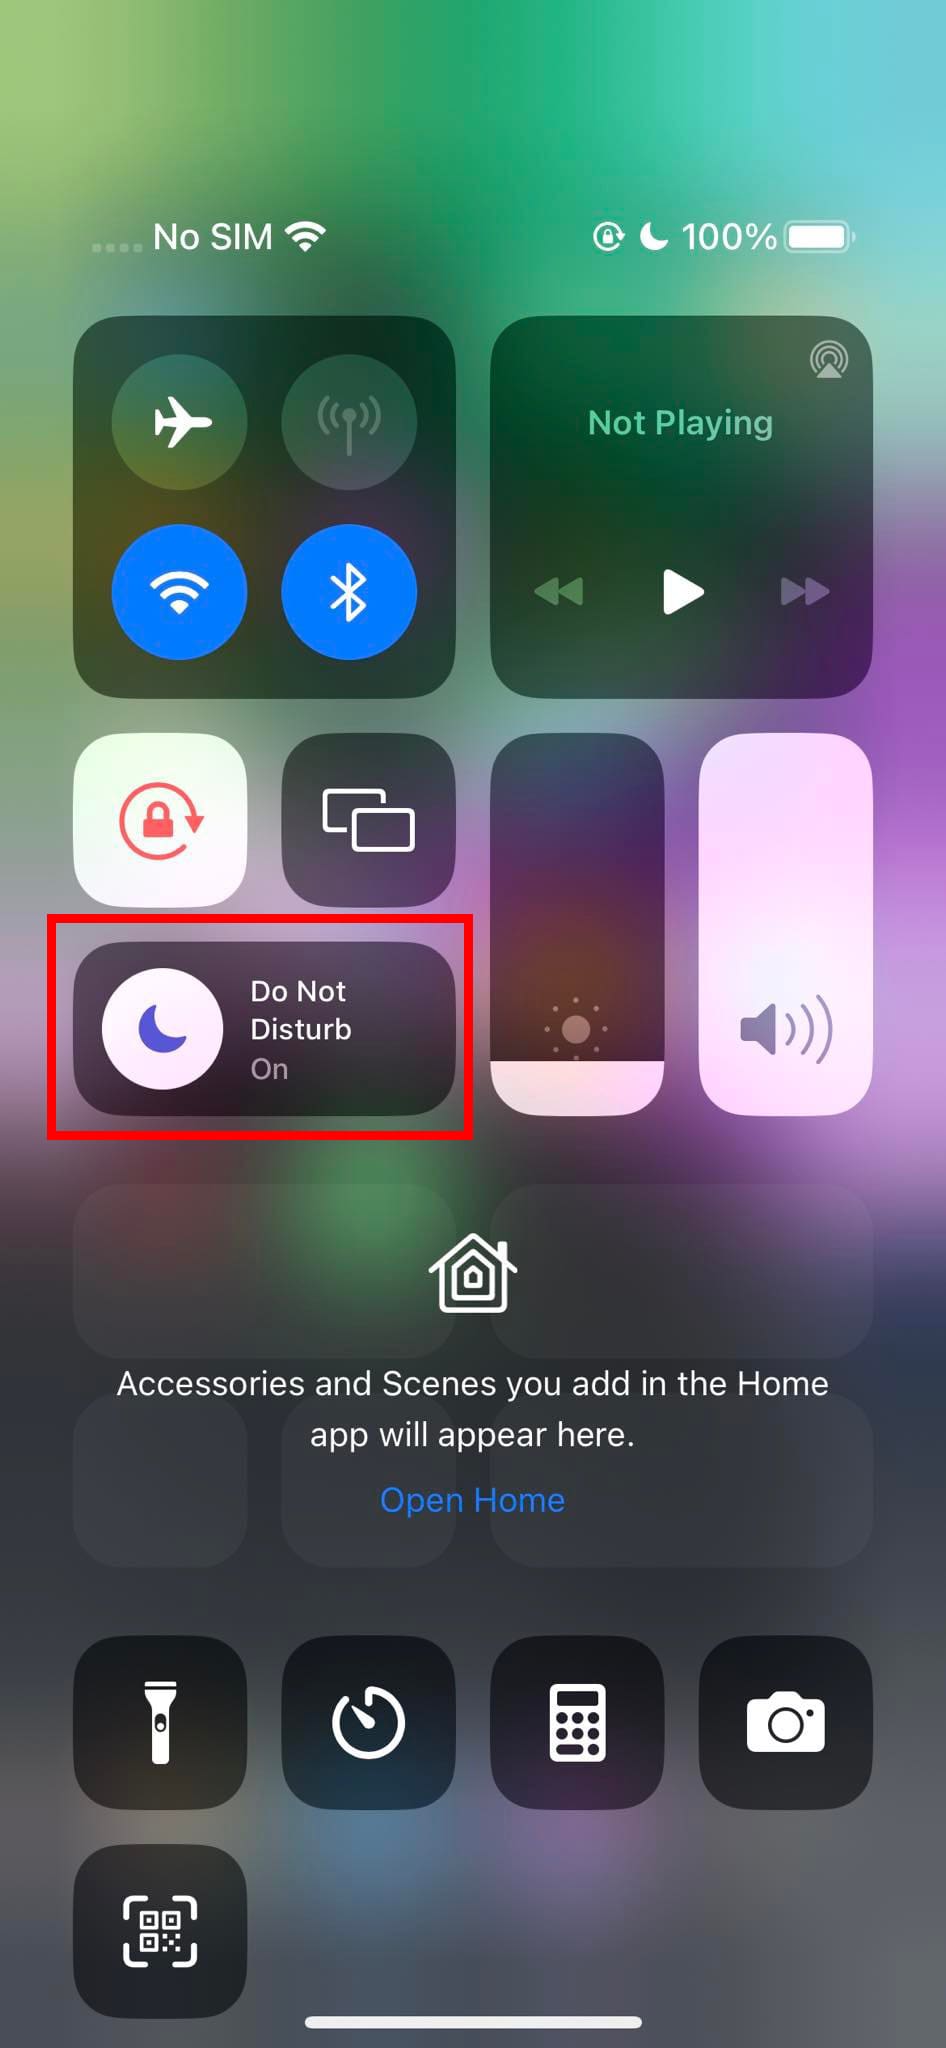 The Do Not Disturb Focus Mode on Control Center of iPhone